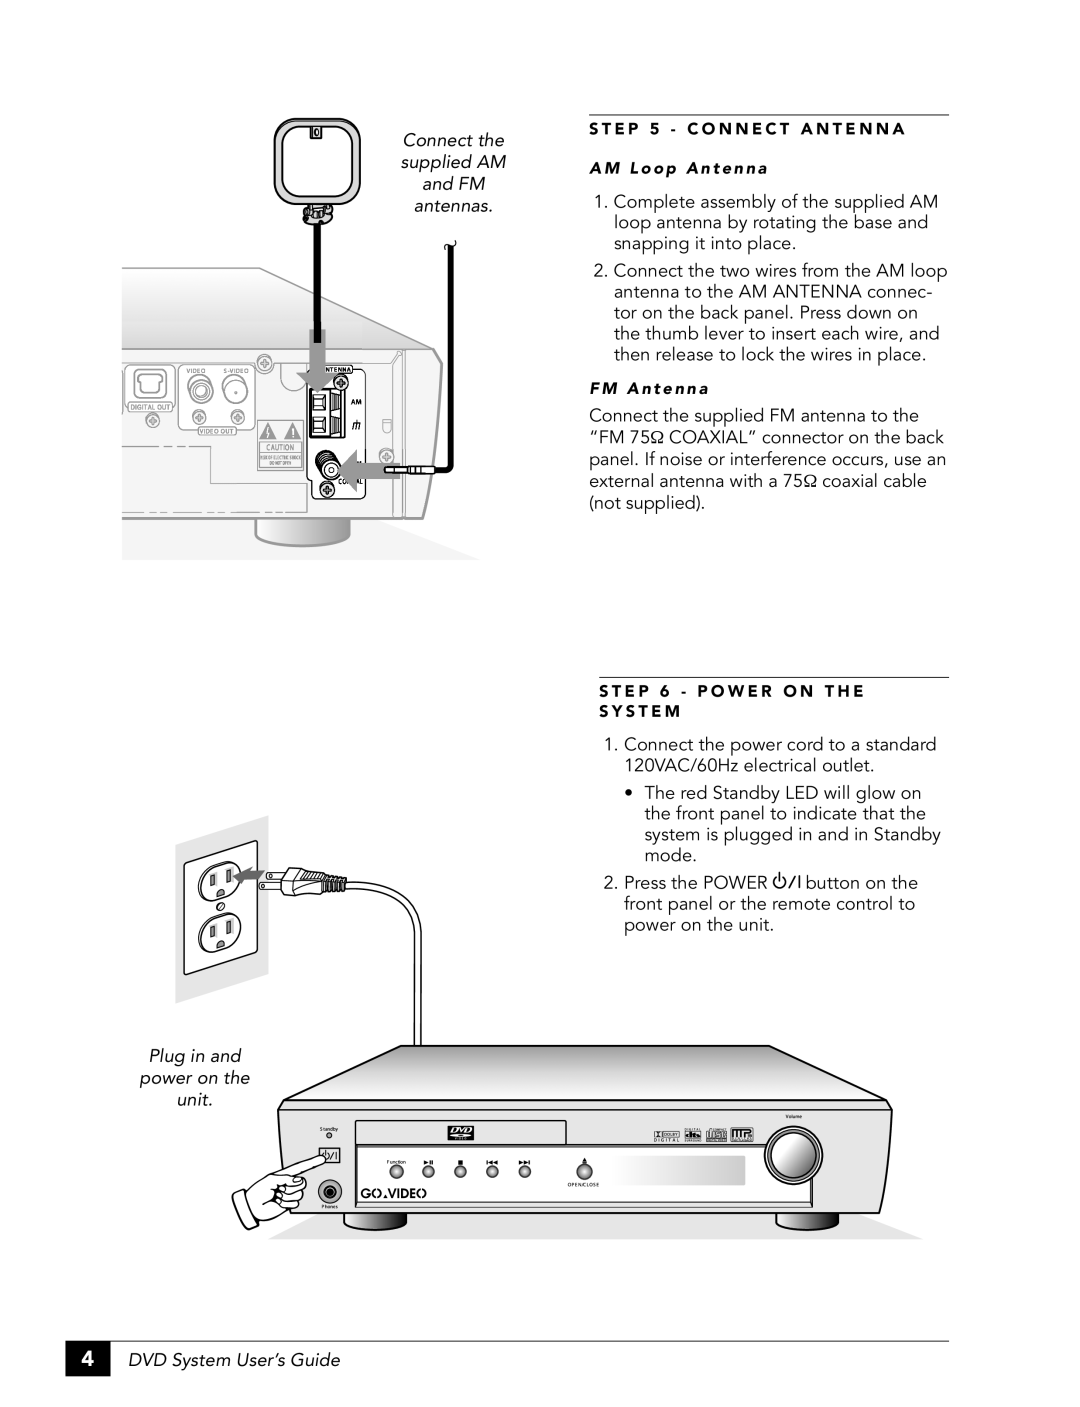 GoVideo DHT7100 manual Connect the supplied AM and FM antennas, Plug in and power on the unit, DVD System User’s Guide 